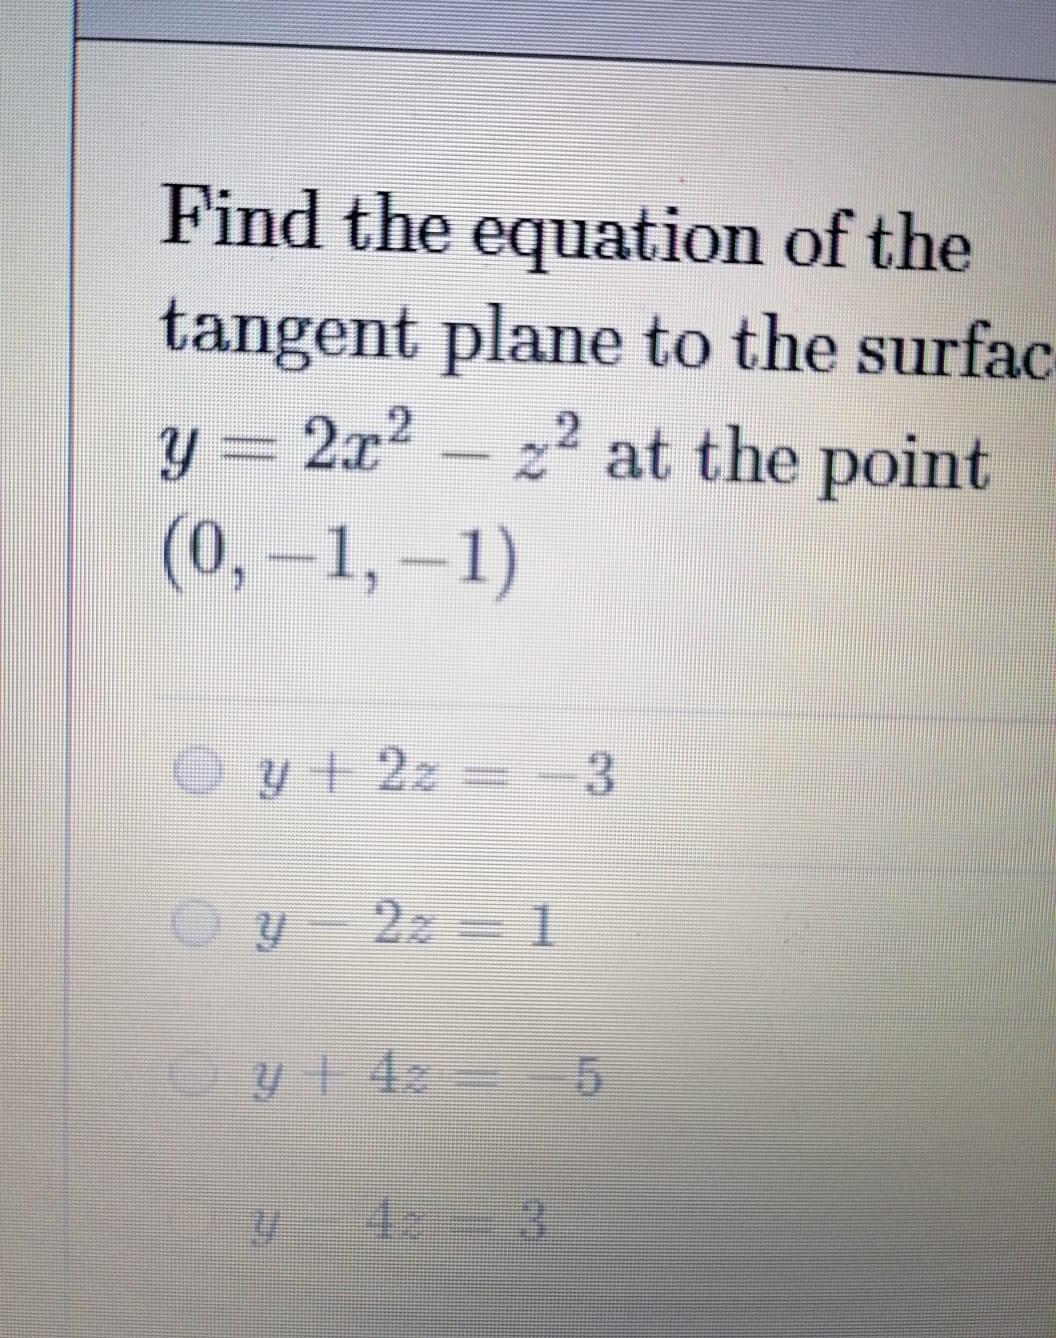 Find The Equation Of The Tangent Plane To The Surfac Y 2x2 22 At The Point 0 1 1 Y 2 3 Y 21 Y 4 5 Y 1